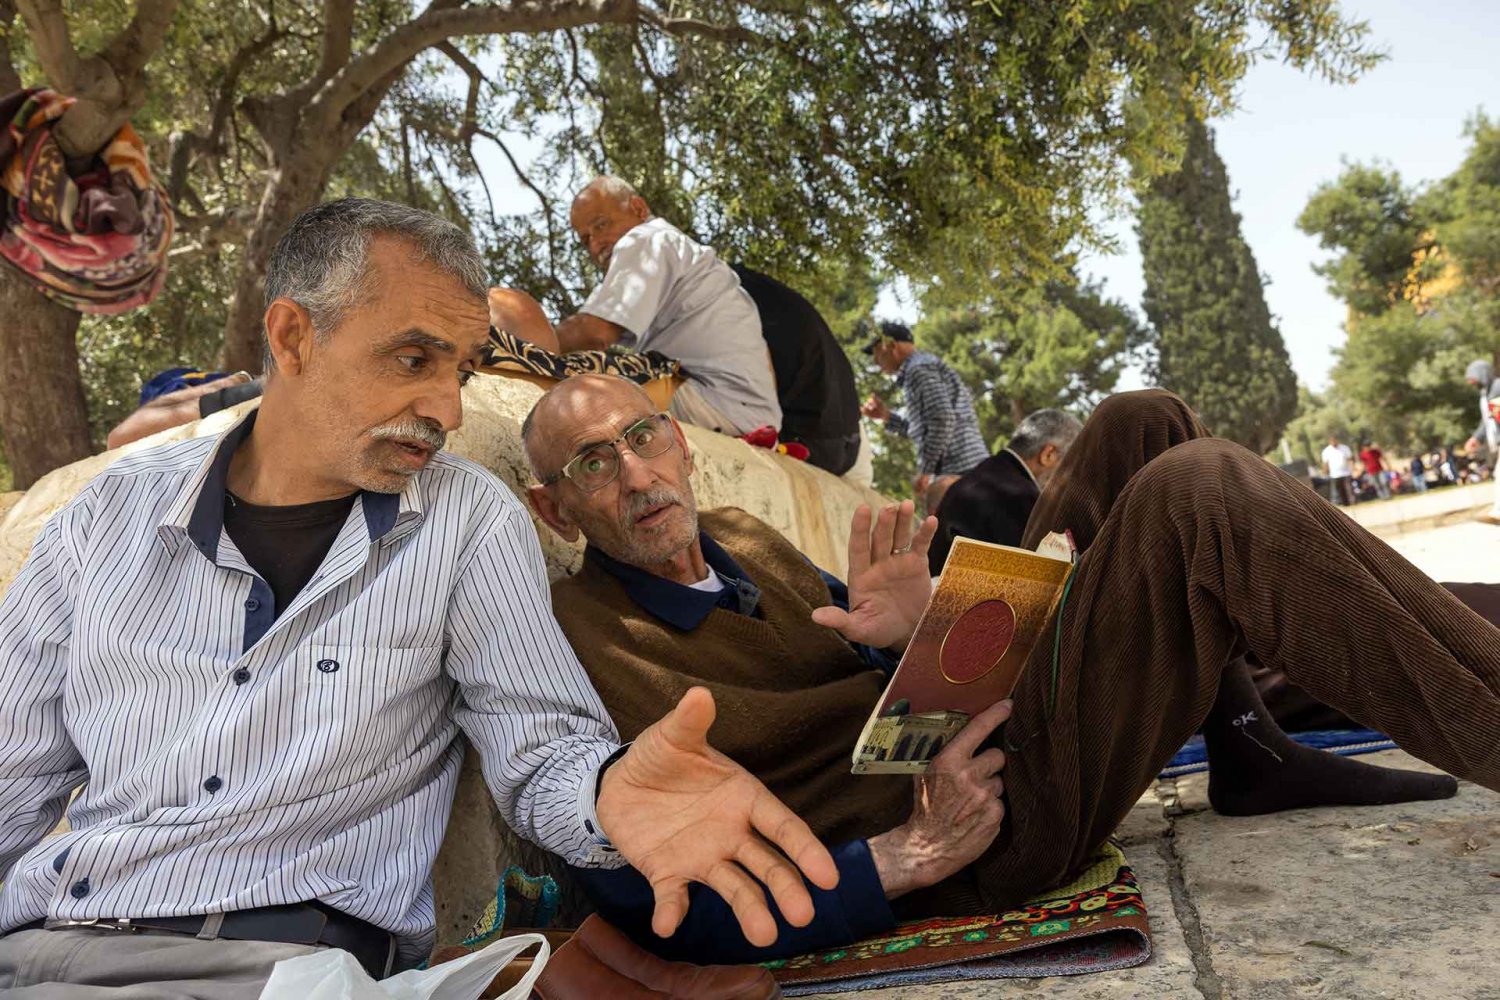 Palestinian Muslims discuss religious texts in the courtyard of al-Aqsa Mosque, Summer 2022